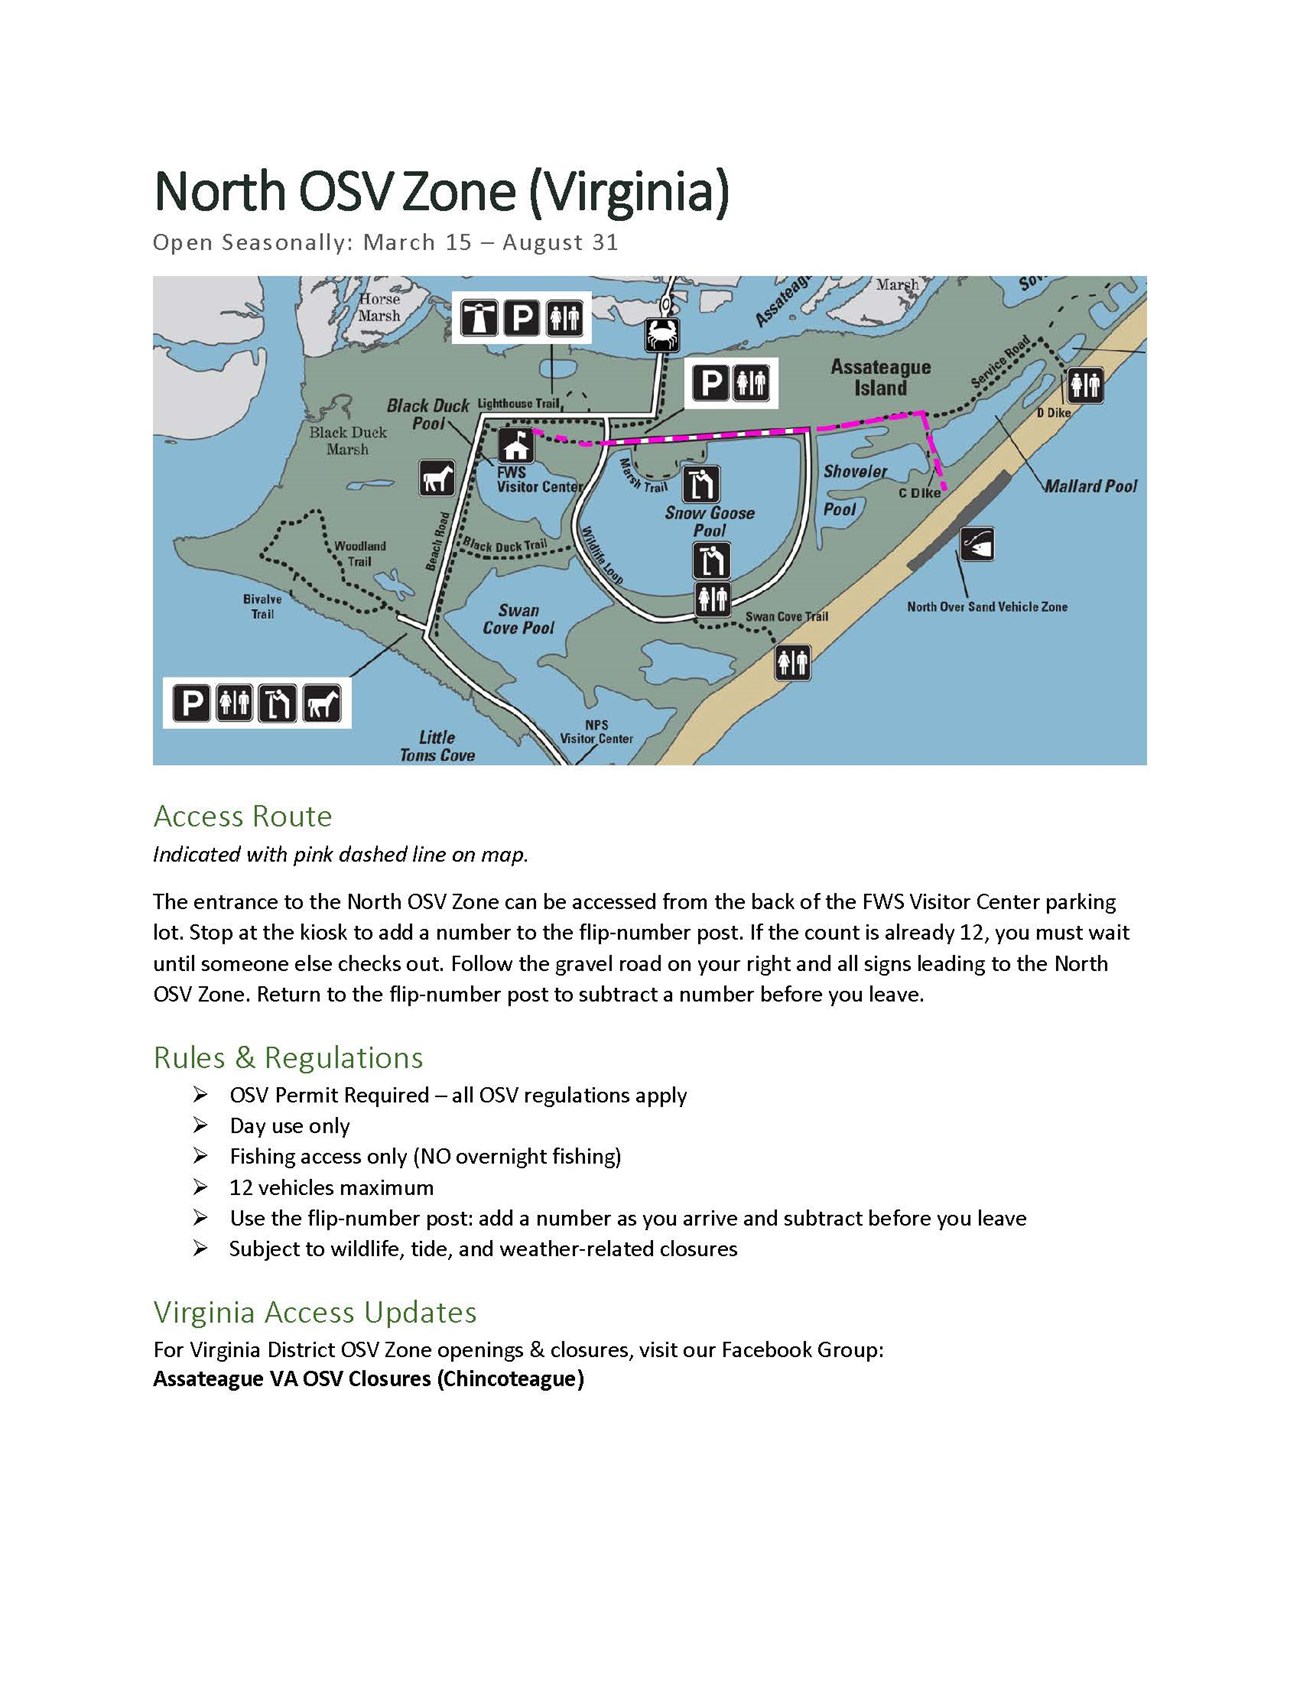 North Over Sand Vehicle (OSV) Zone Map and Regulations